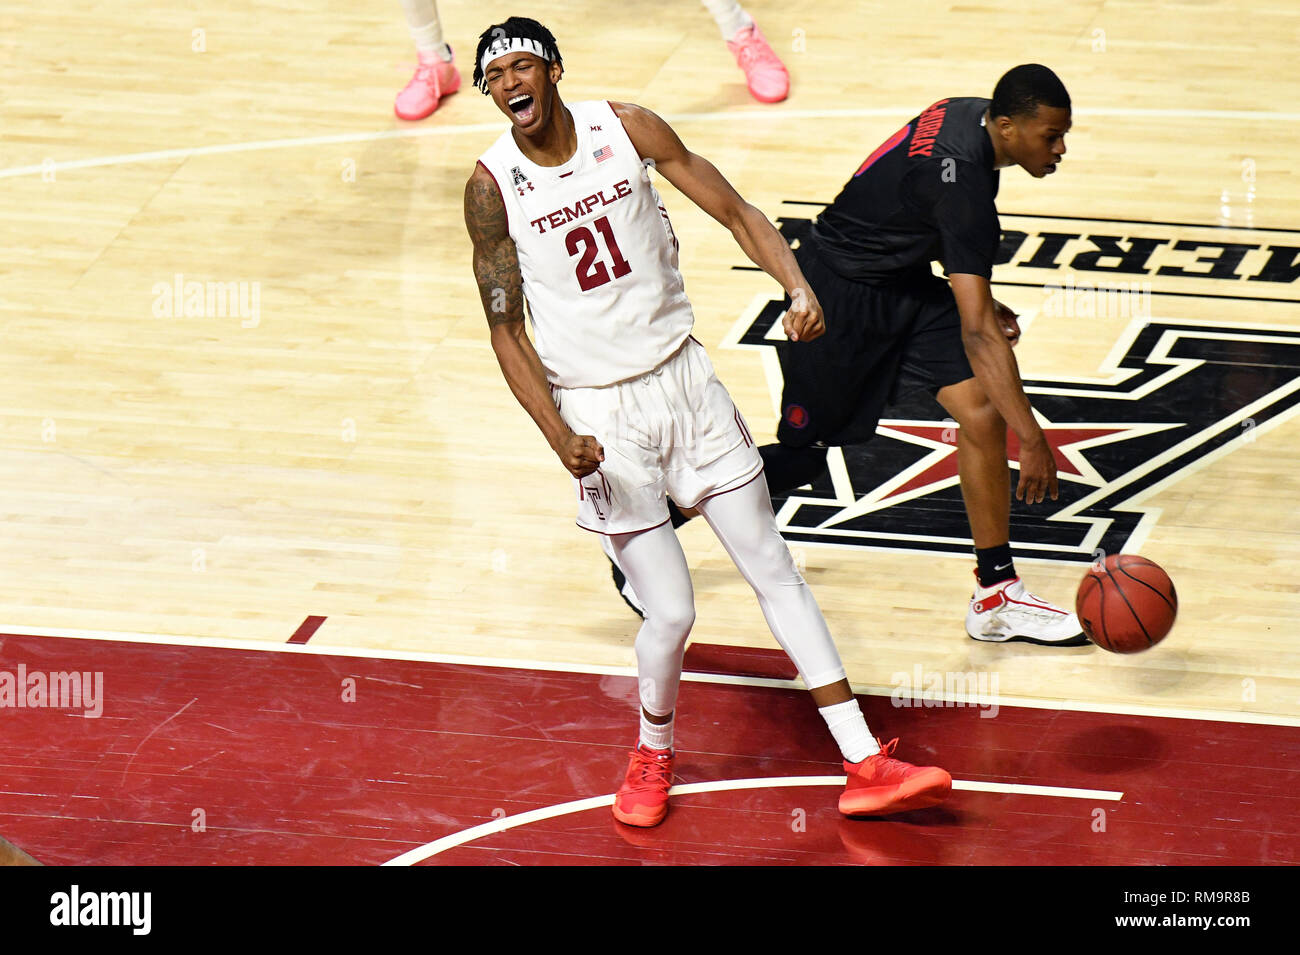 Philadelphia, Pennsylvania, USA. 13th Feb, 2019. Temple Owls forward JUSTYN HAMILTON (21) celebrates an empathic first half dunk during the American Athletic Conference basketball game played at the Liacouras Center in Philadelphia. Temple and SMU are tied at 34 at halftime. Credit: Ken Inness/ZUMA Wire/Alamy Live News Stock Photo